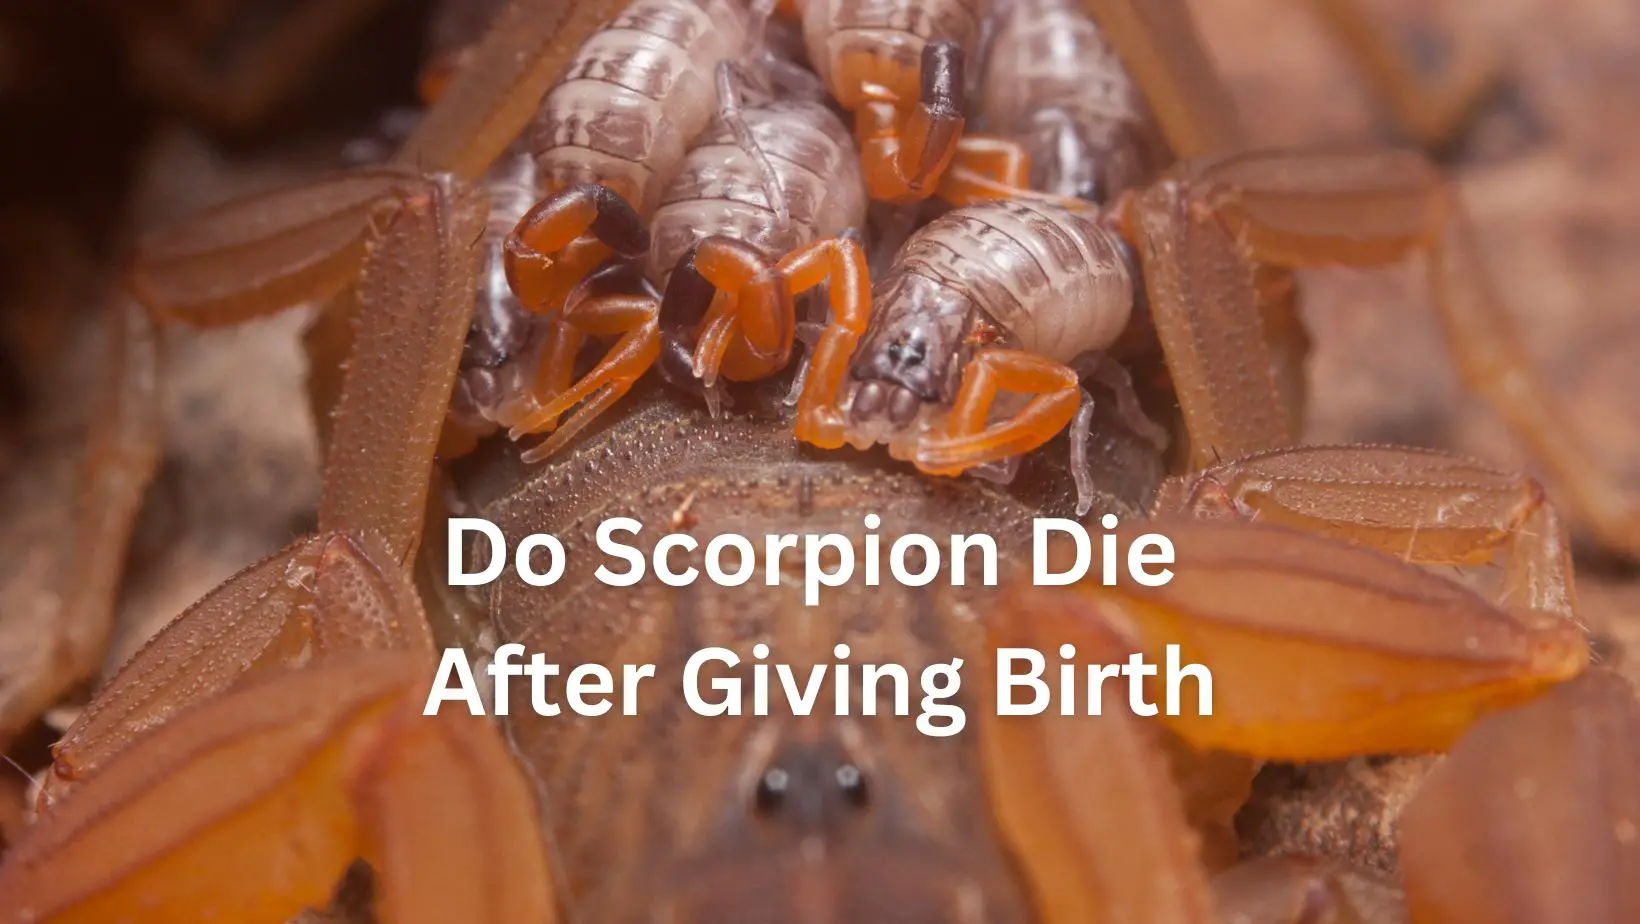 Do Scorpion Die After Giving Birth